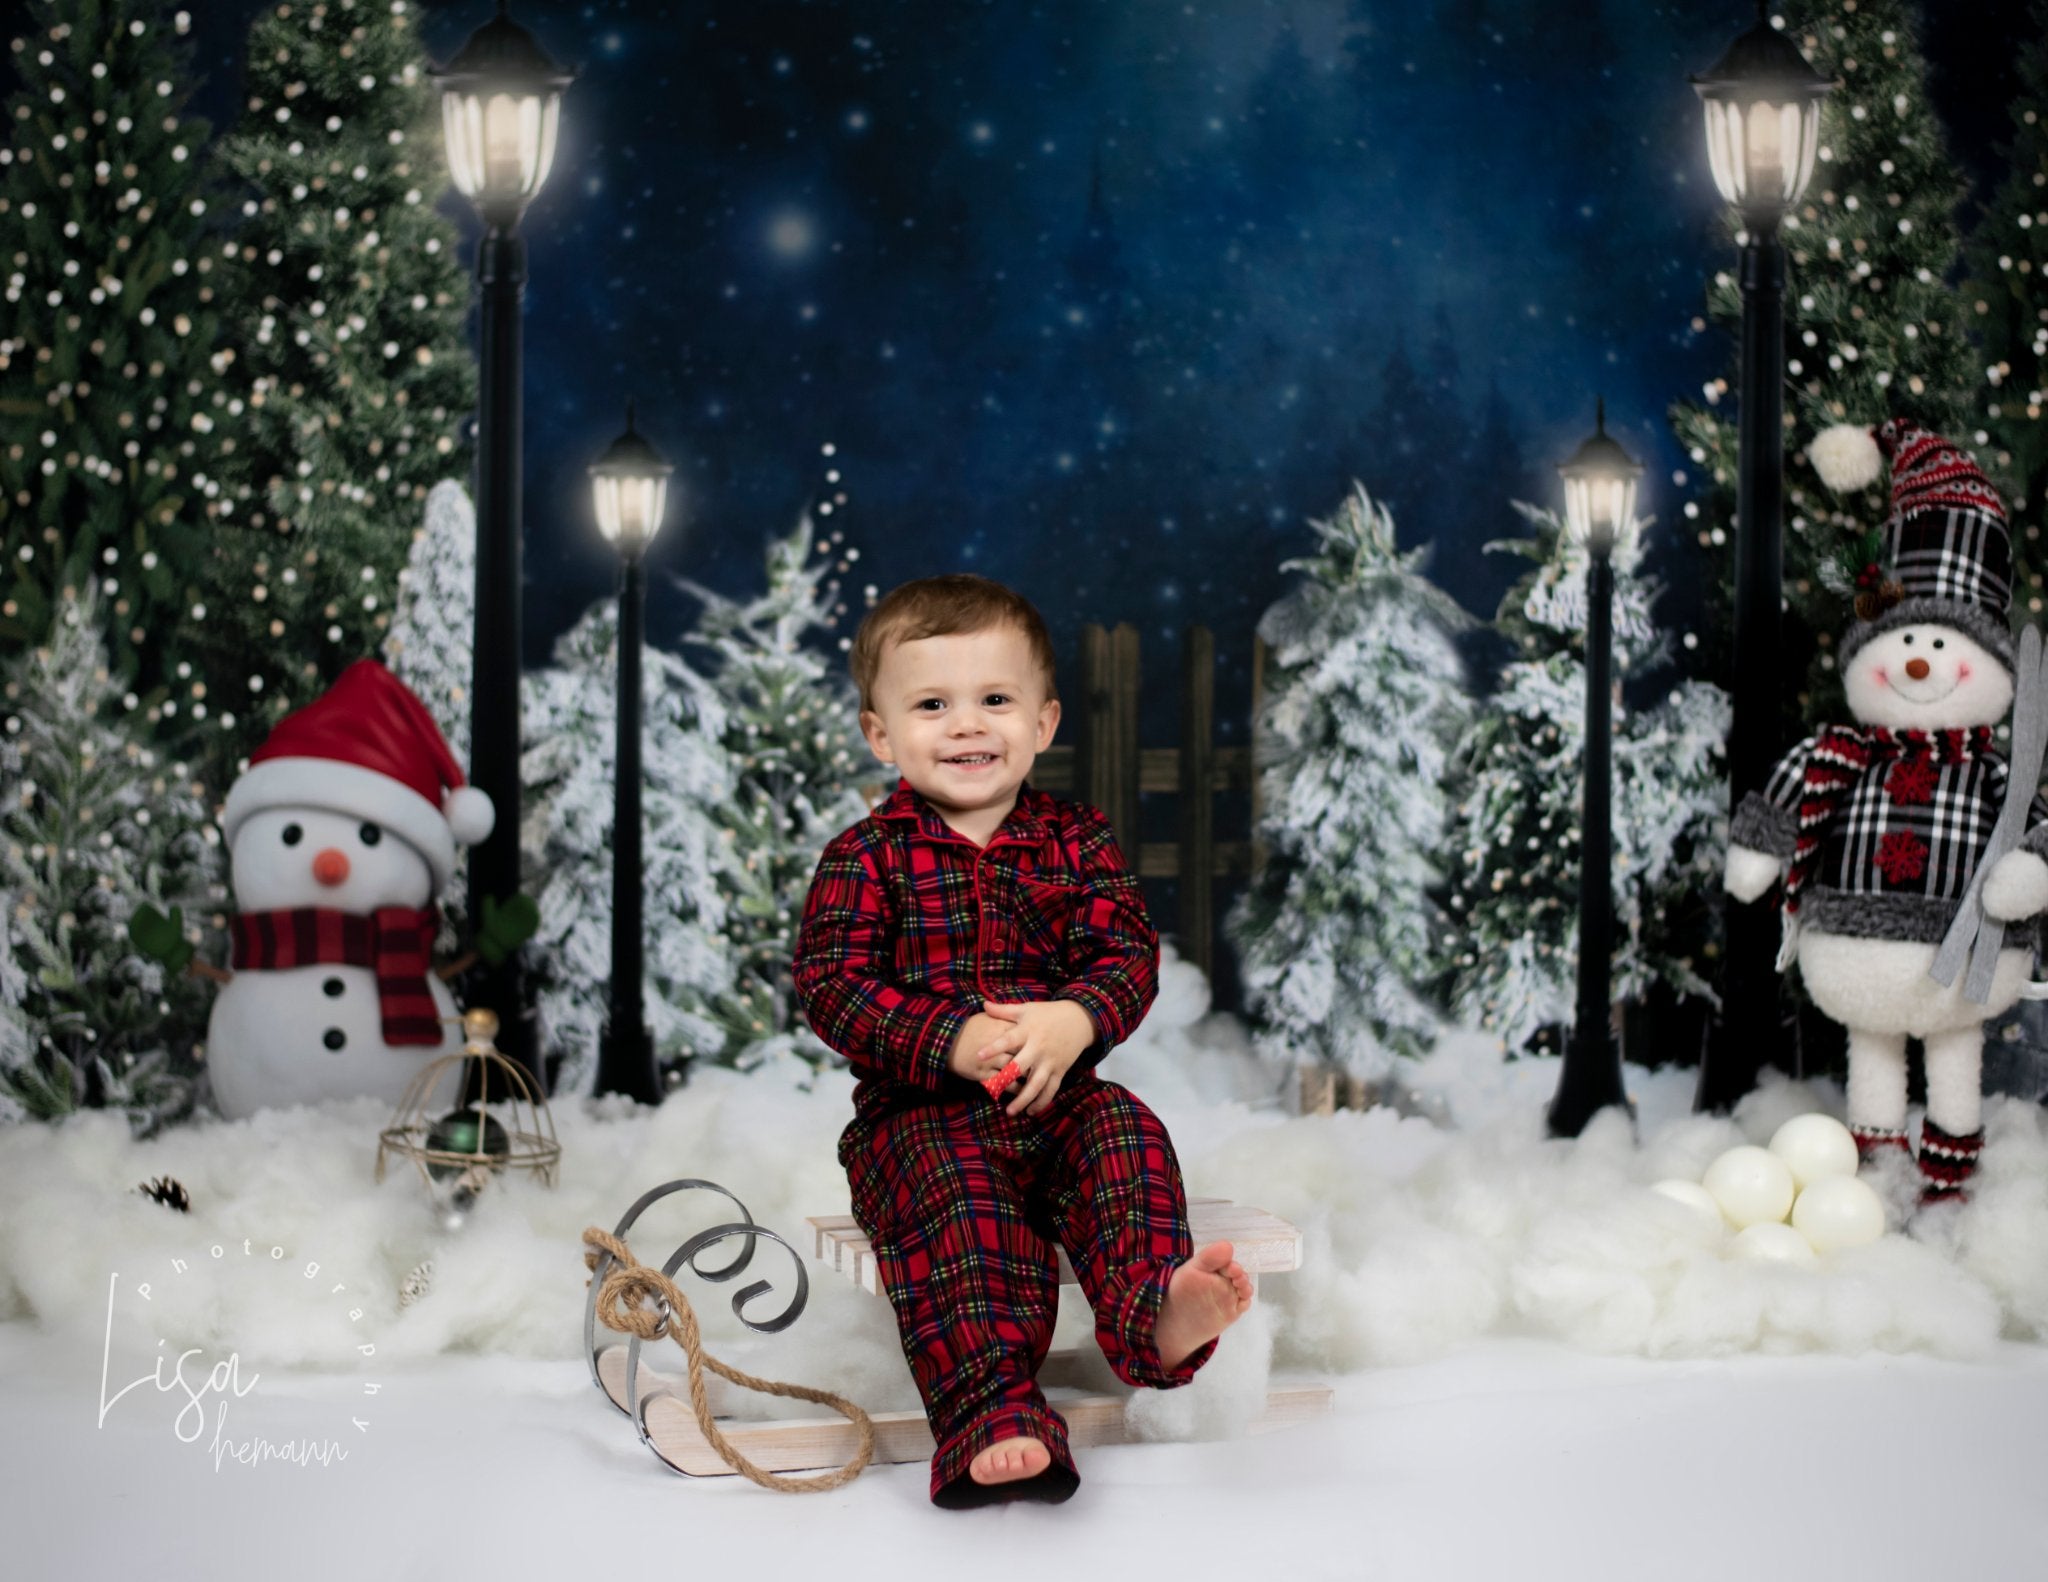 Kate Christmas Backdrop Snow Tree Night Snowman for Photography